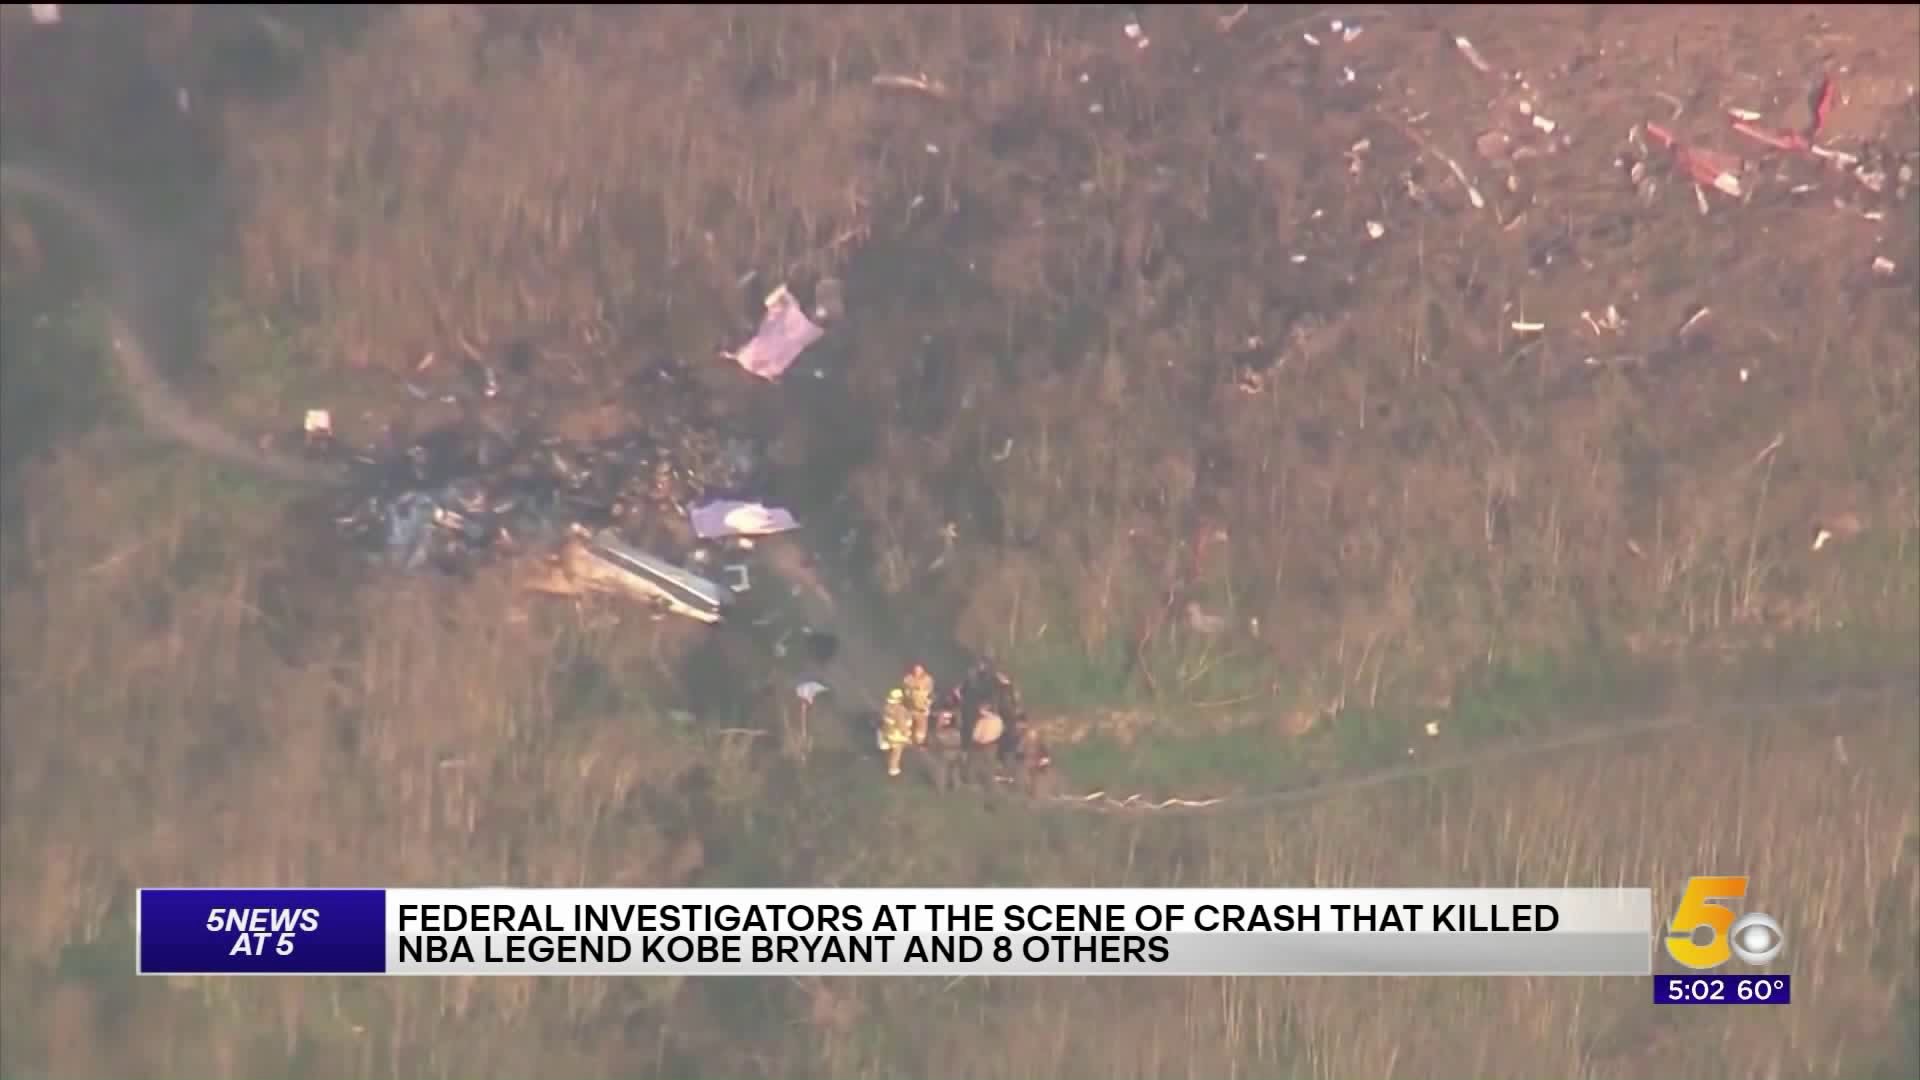 All 9 Victims In The Kobe Bryant Helicopter Crash Have Been Identified